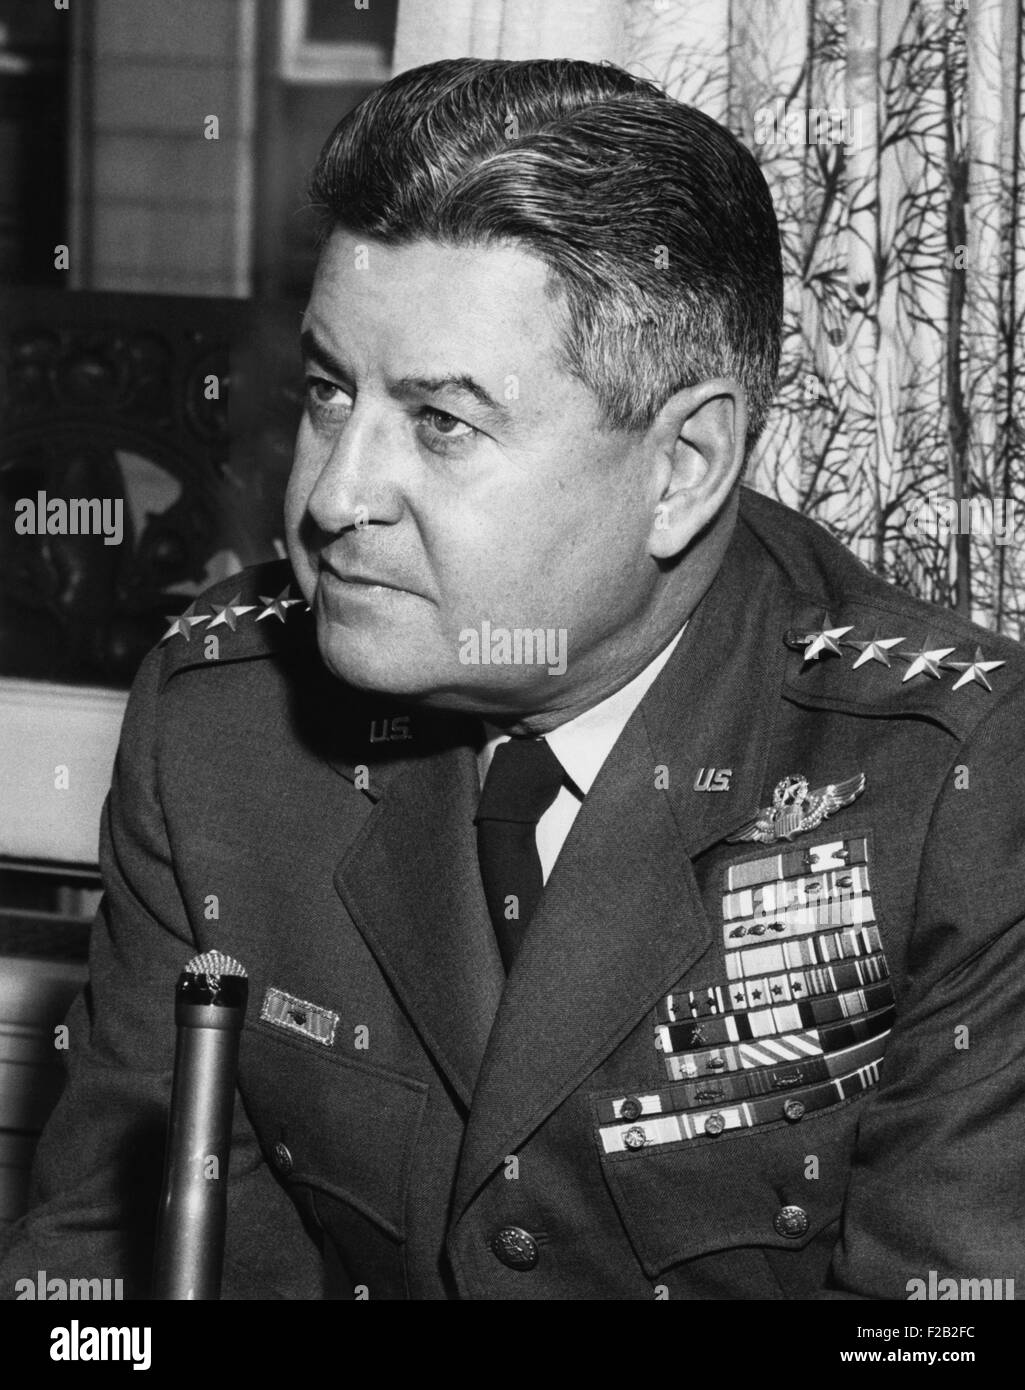 U.S. Air Force General Curtis Lemay retired in 1965. He enlisted in the Army Air Force in 1926. His greatest impact was the strategic bombing campaign in the Pacific theater and of Japan during World War II. (CSU 2015 8 534) Stock Photo